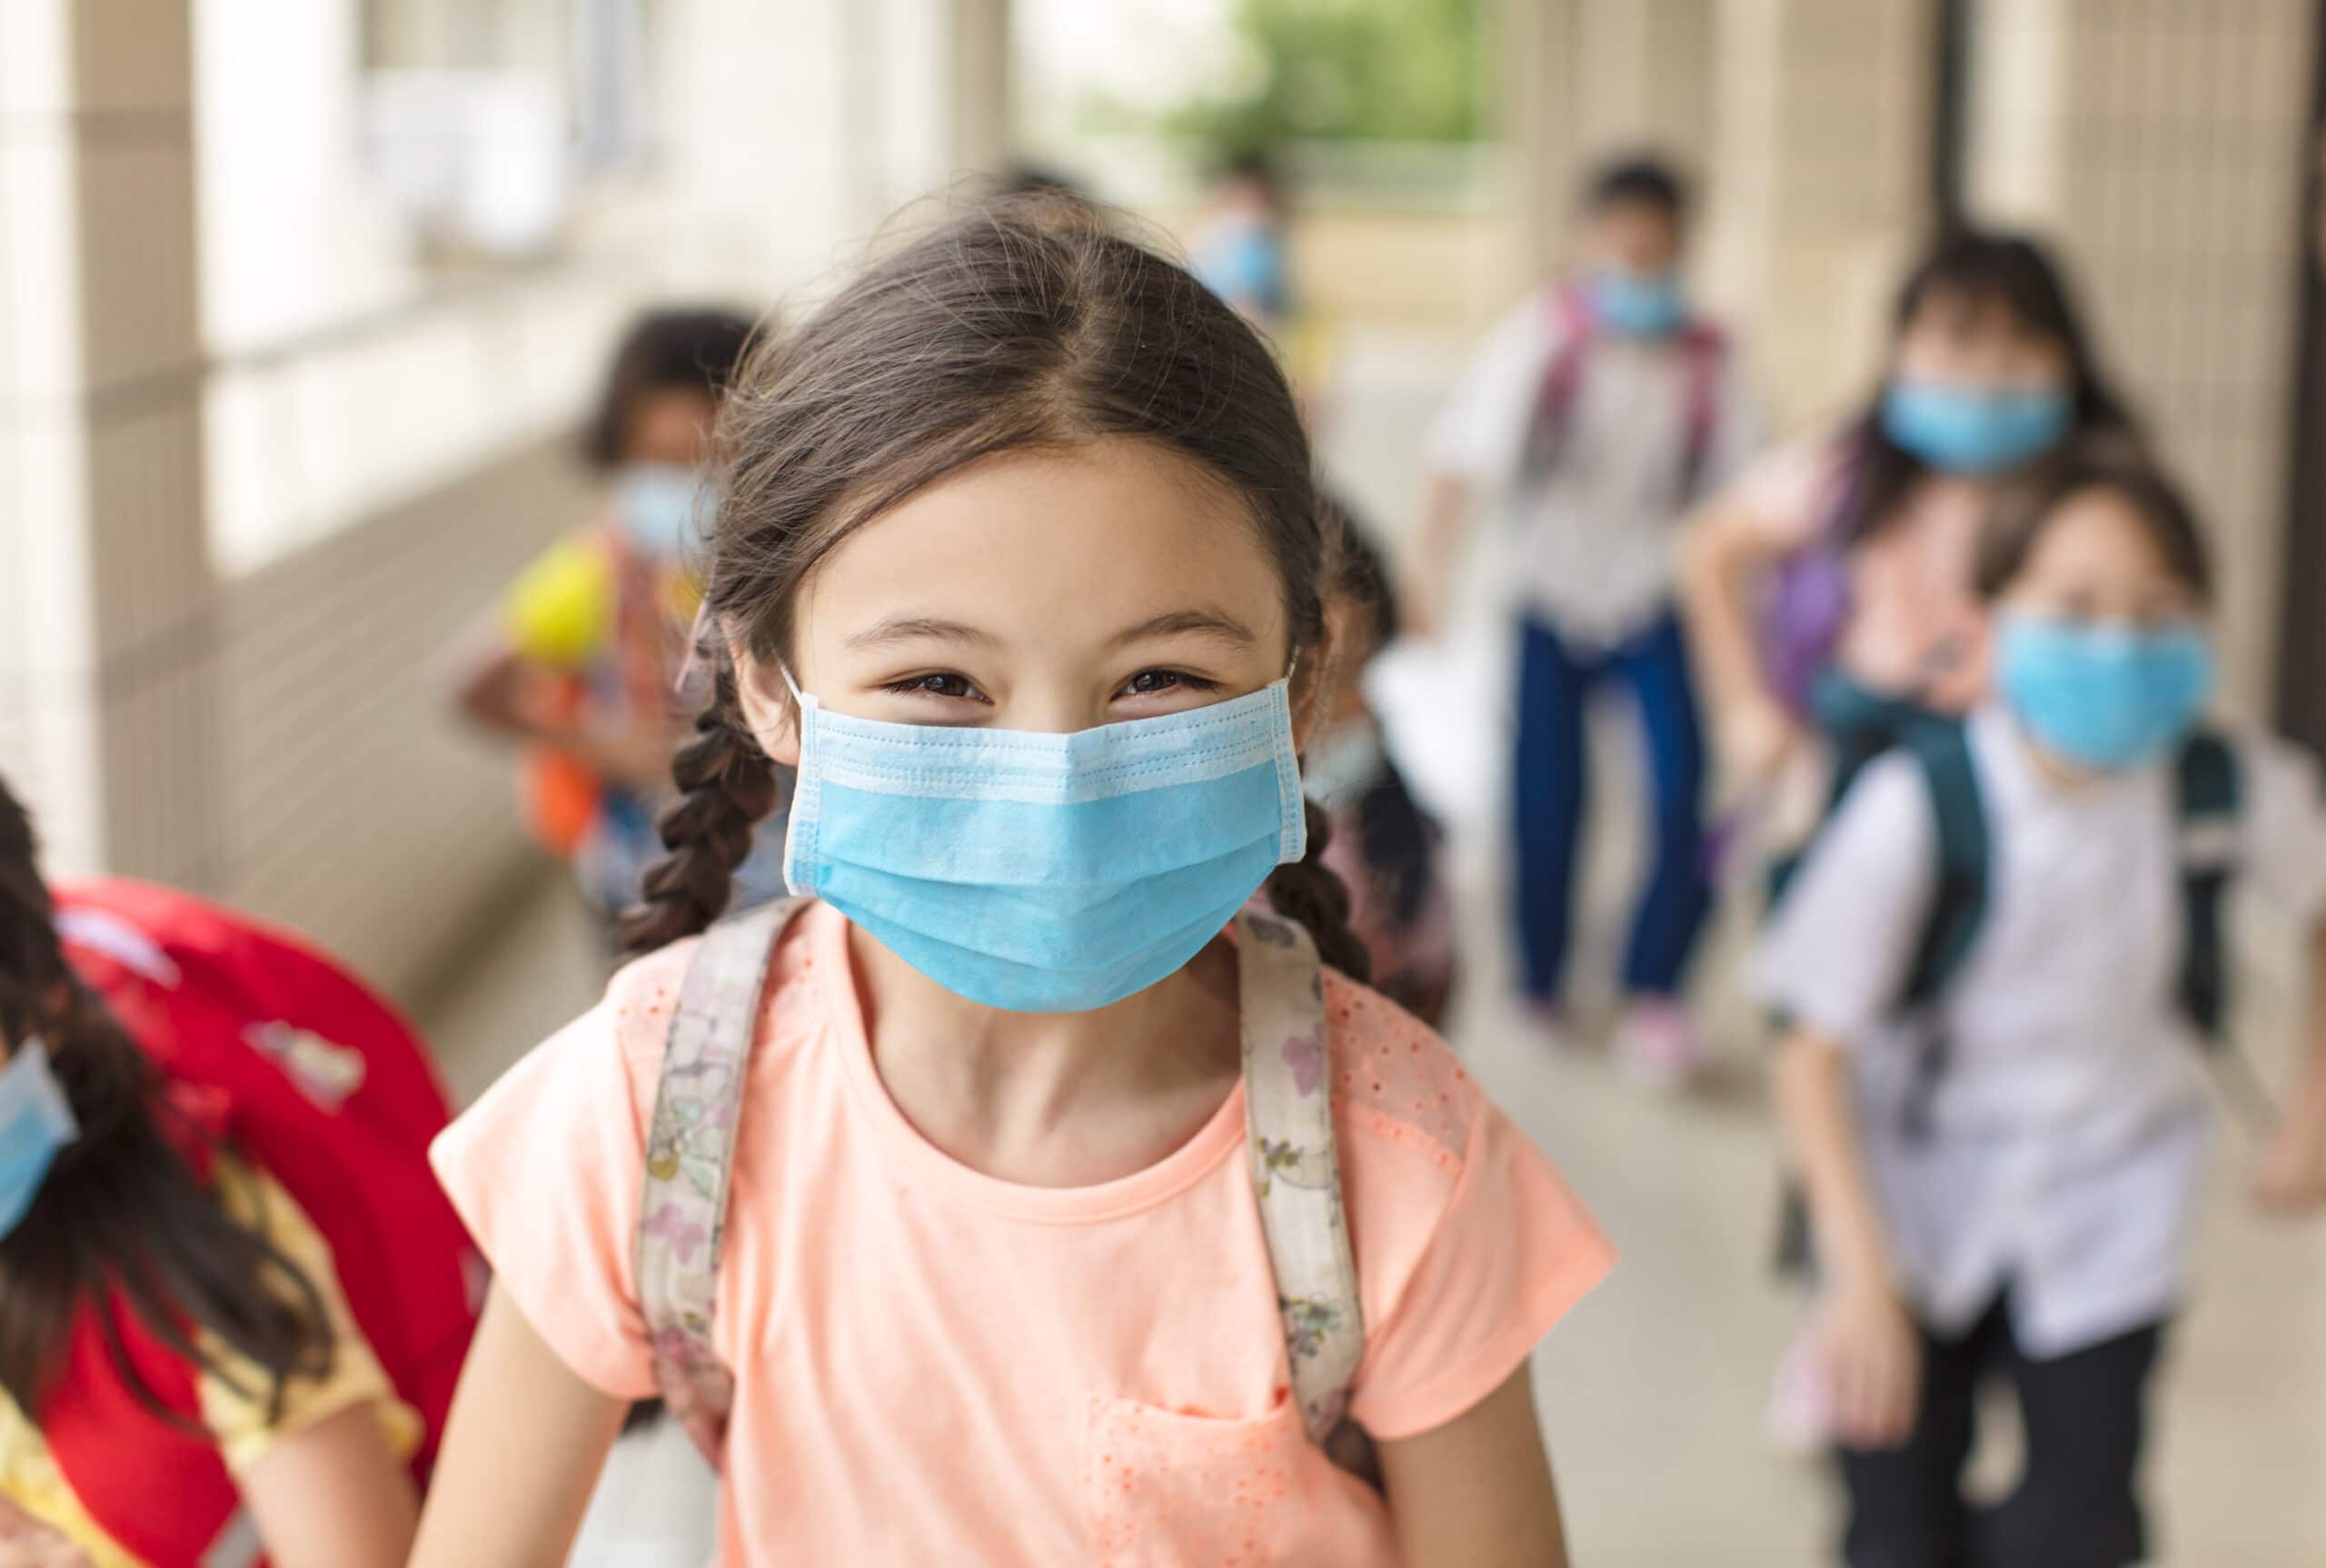 Research published in this week's Morbidity and Mortality Weekly Report finds that face masks were effective in preventing the spread of COVID-19 in Arkansas K-12 schools.